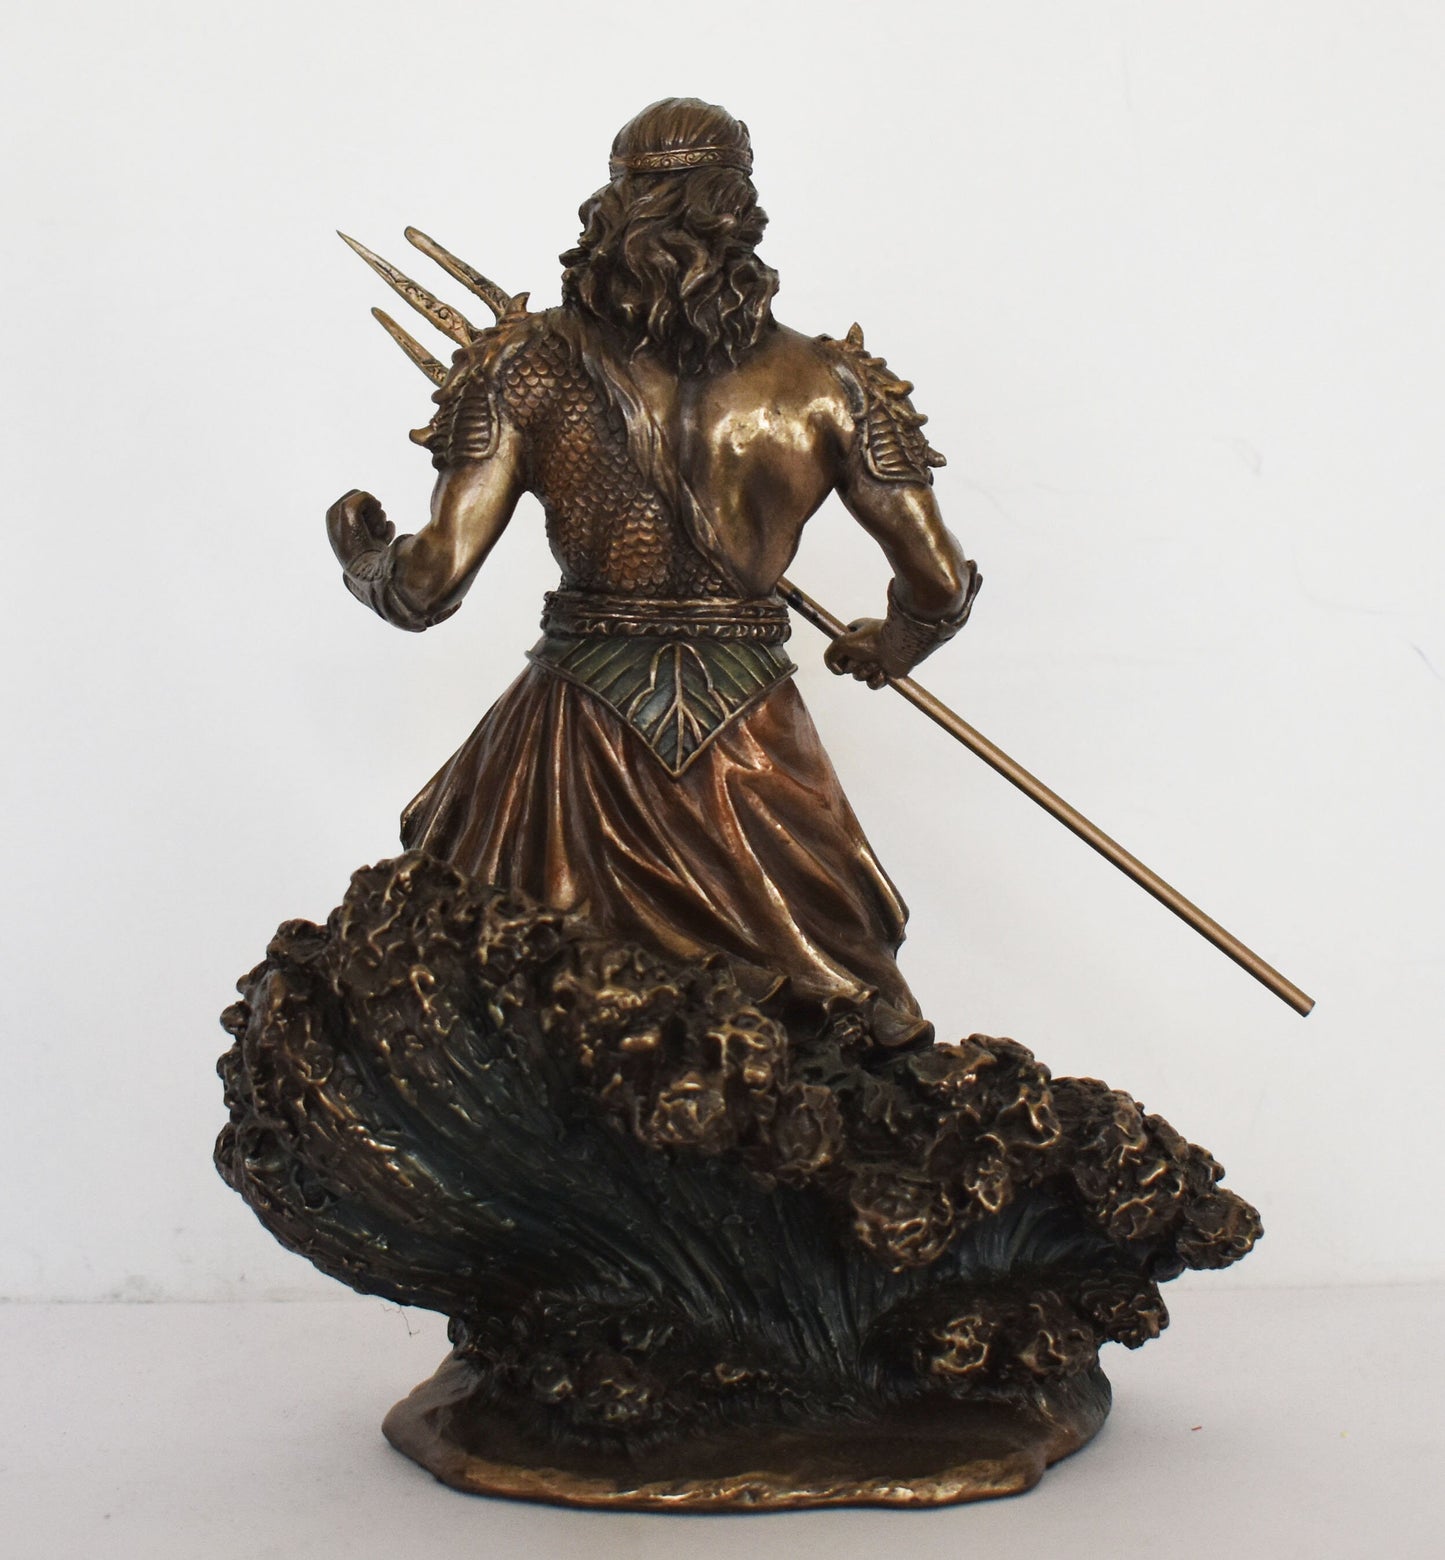 Poseidon Neptune - Greek Roman God of the Sea, Storms, Earthquakes and Horses -  Protector of Seafarers - Cold Cast Bronze Resin